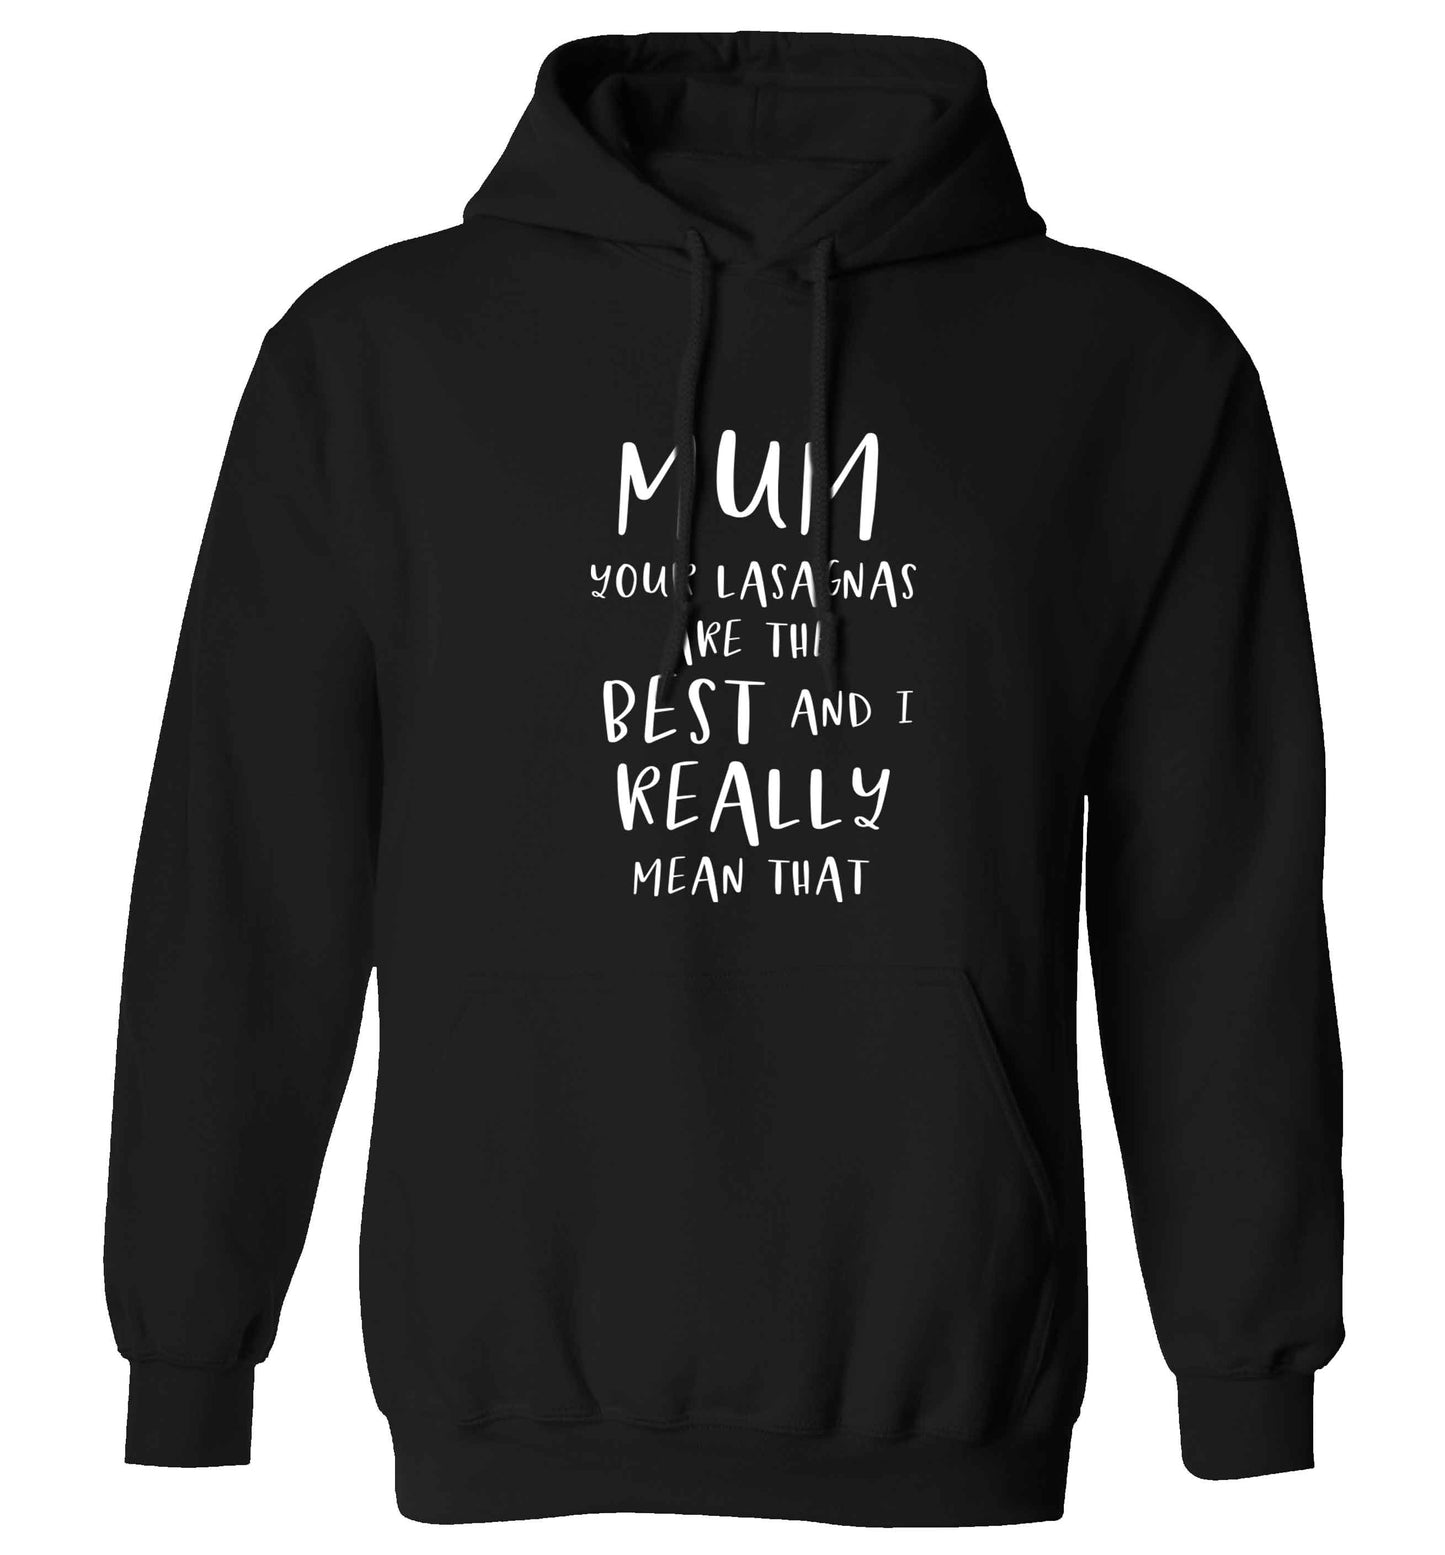 Funny gifts for your mum on mother's dayor her birthday! Mum your lasagnas are the best and I really mean that adults unisex black hoodie 2XL